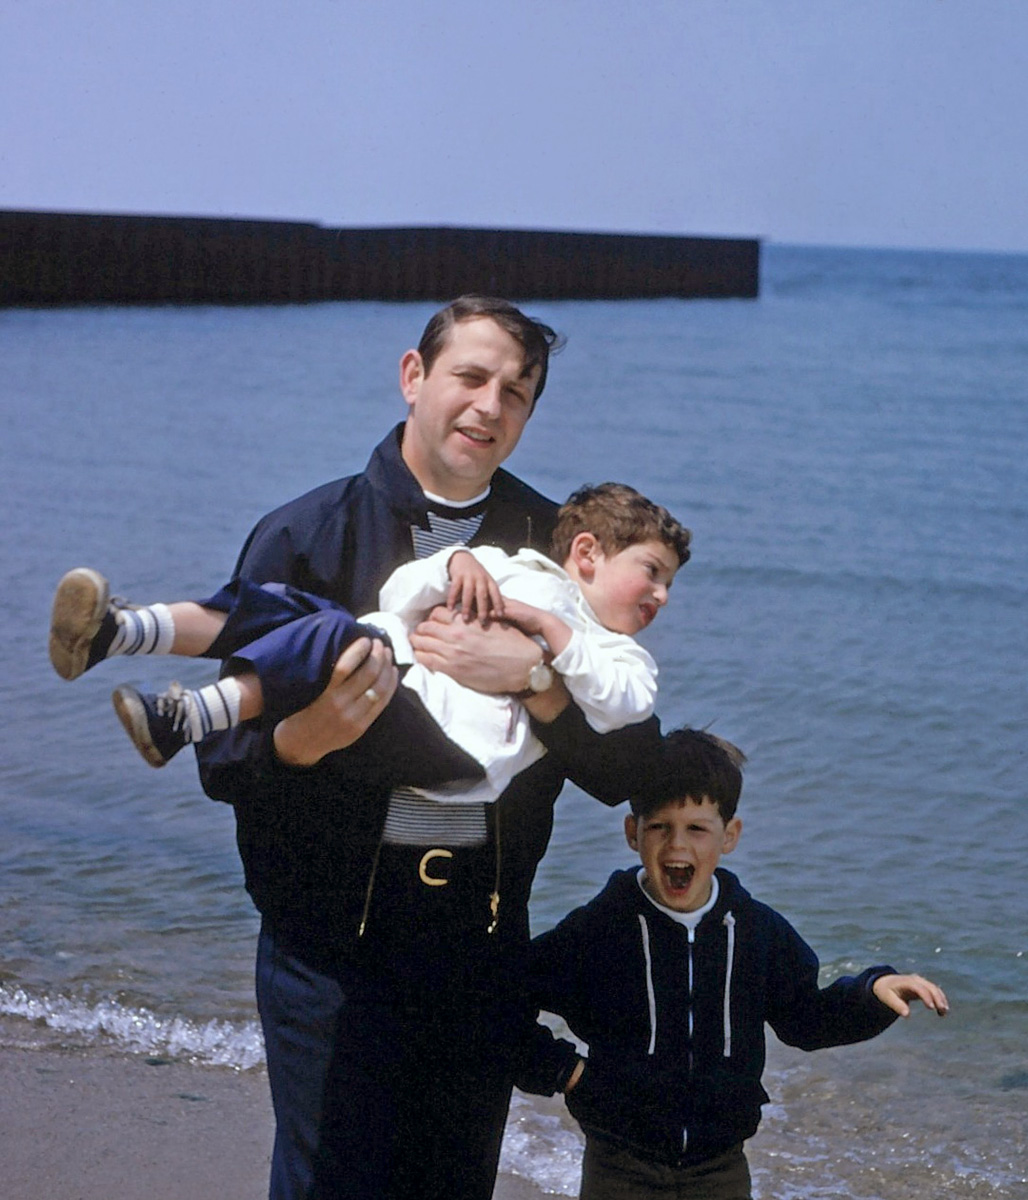 Sol Hurvitz and sons Jimmy and Andy, 1966, Evanston, IL. My father, Sol A. Hurvitz (9/19/32-4/13/09), was born in Chicago, IL and worked in advertising. We were raised in Lincolnwood, IL and were often taken in spring and summer down to Lake Michigan to walk in Evanston where it was cooler and shadier. View full size.